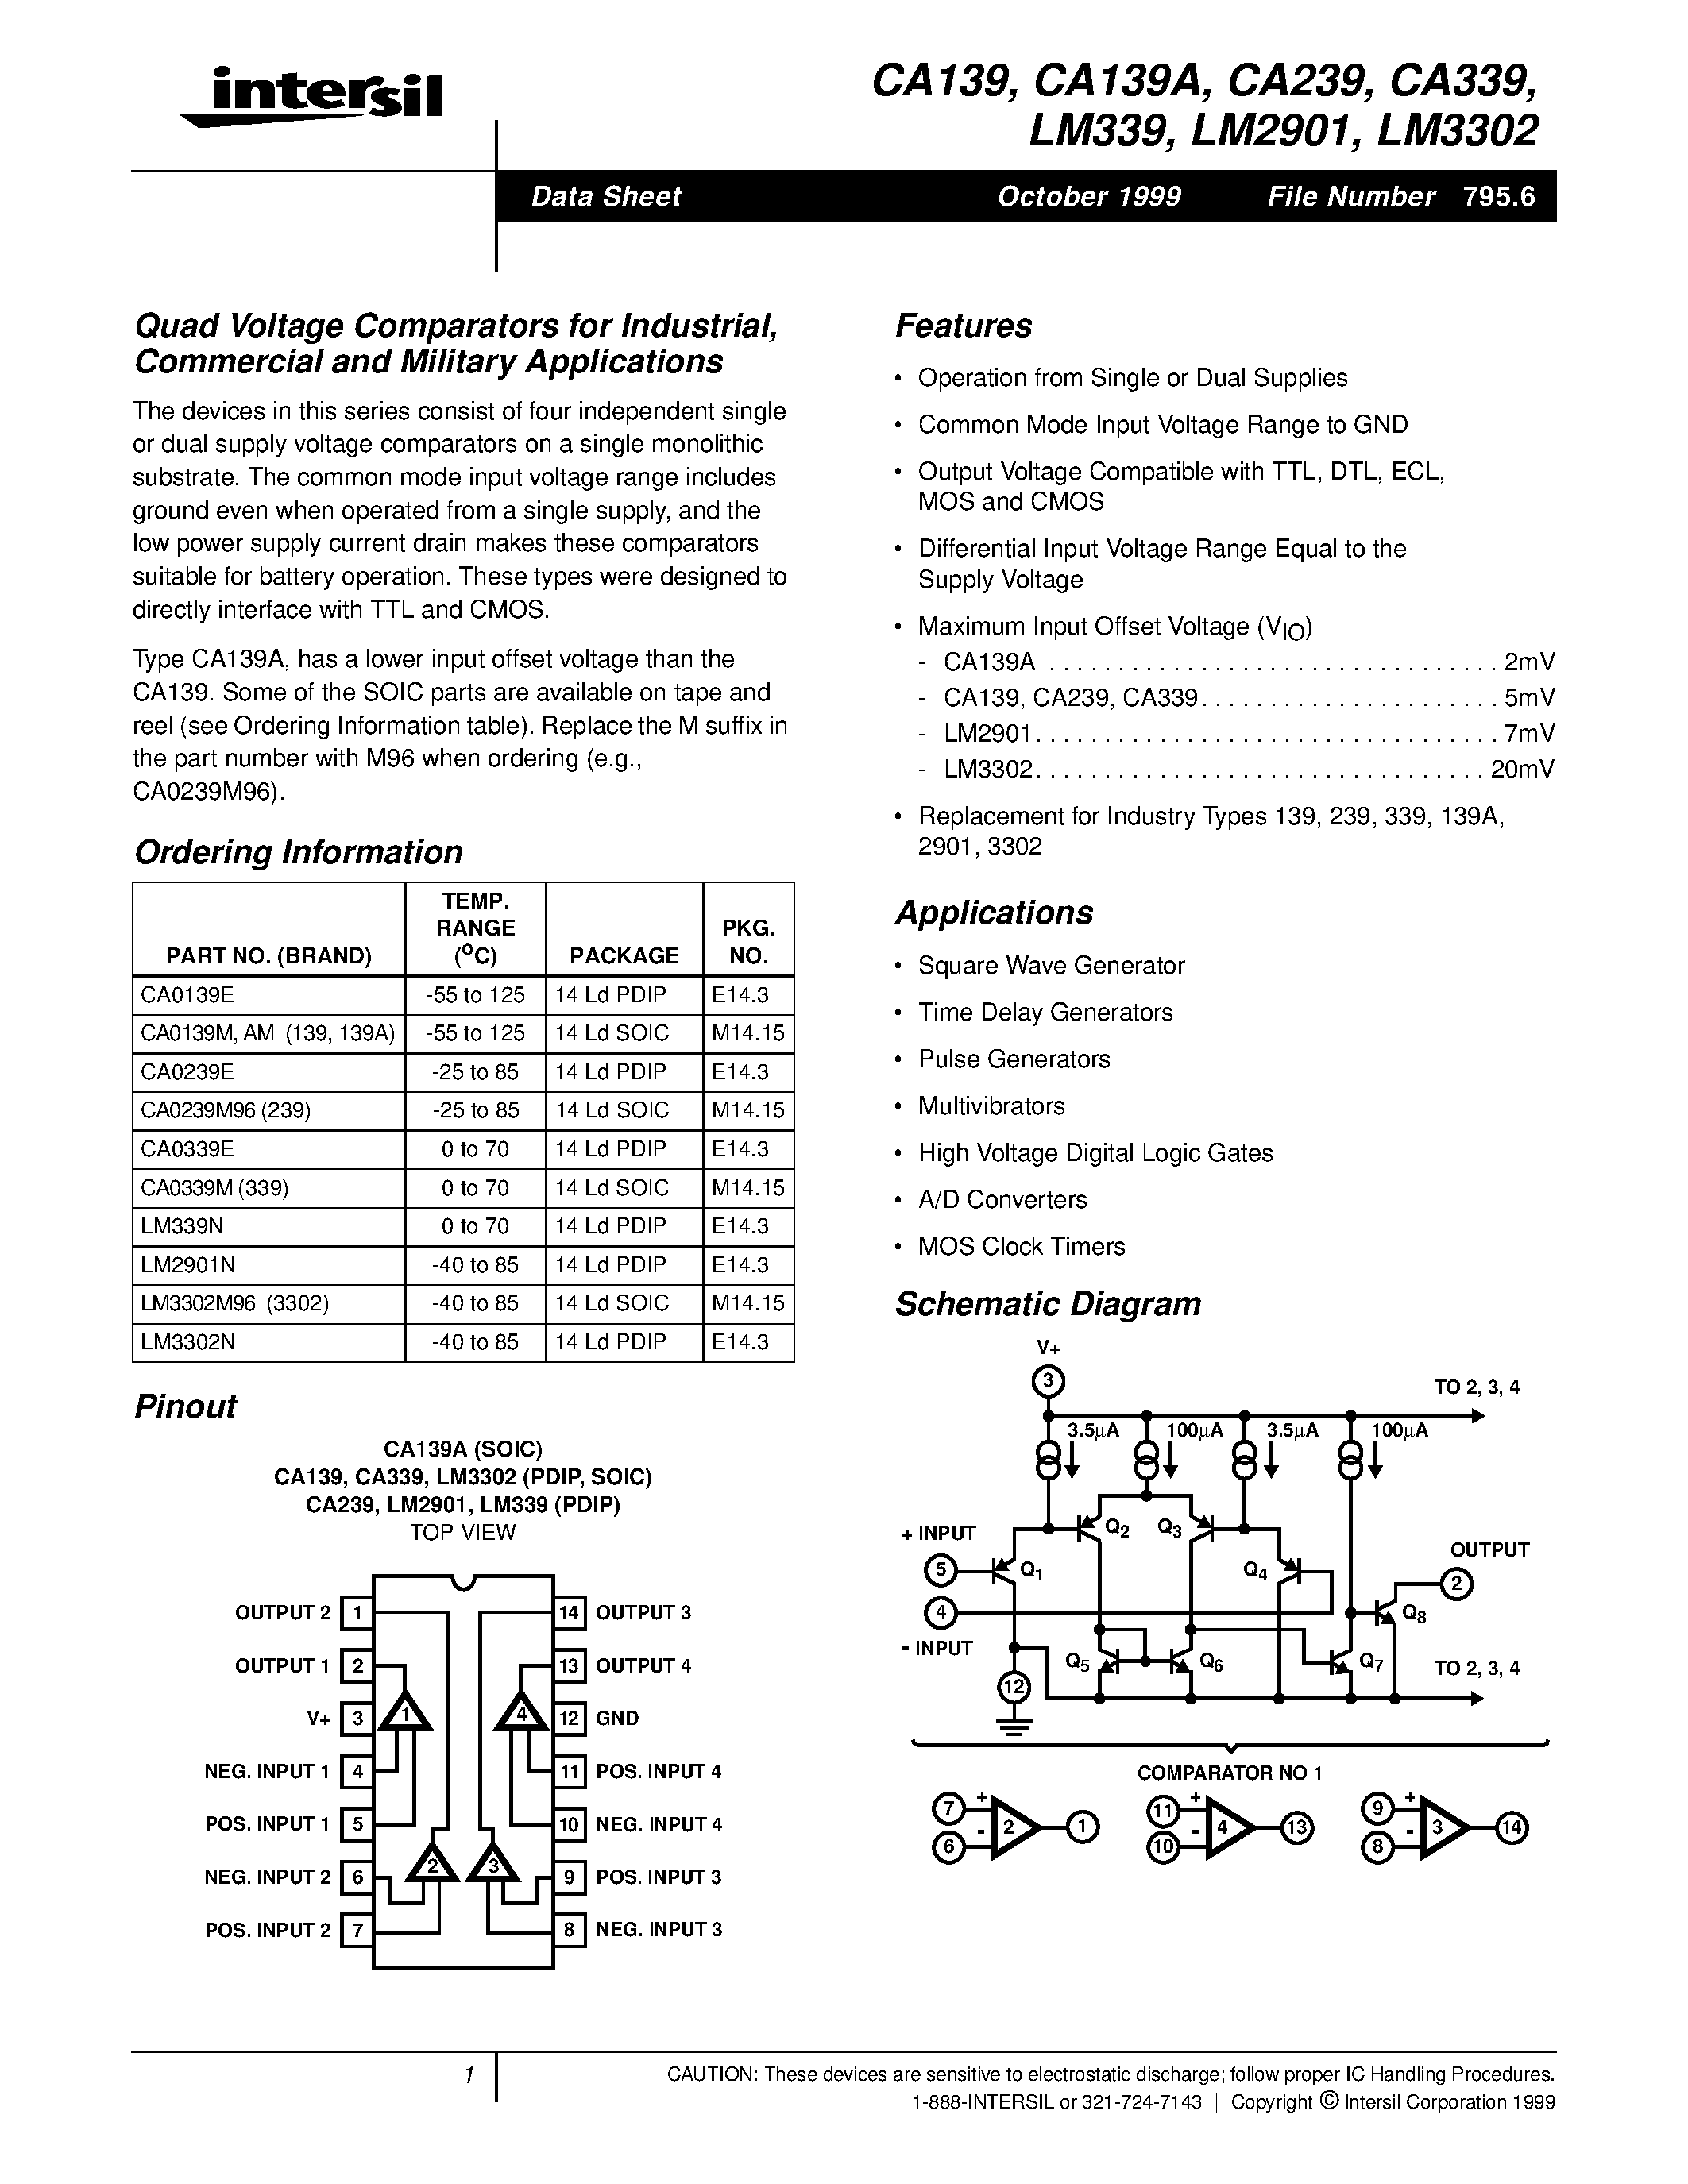 Datasheet CA339 - Quad Voltage Comparators for Industrial/ Commercial and Military Applications page 1